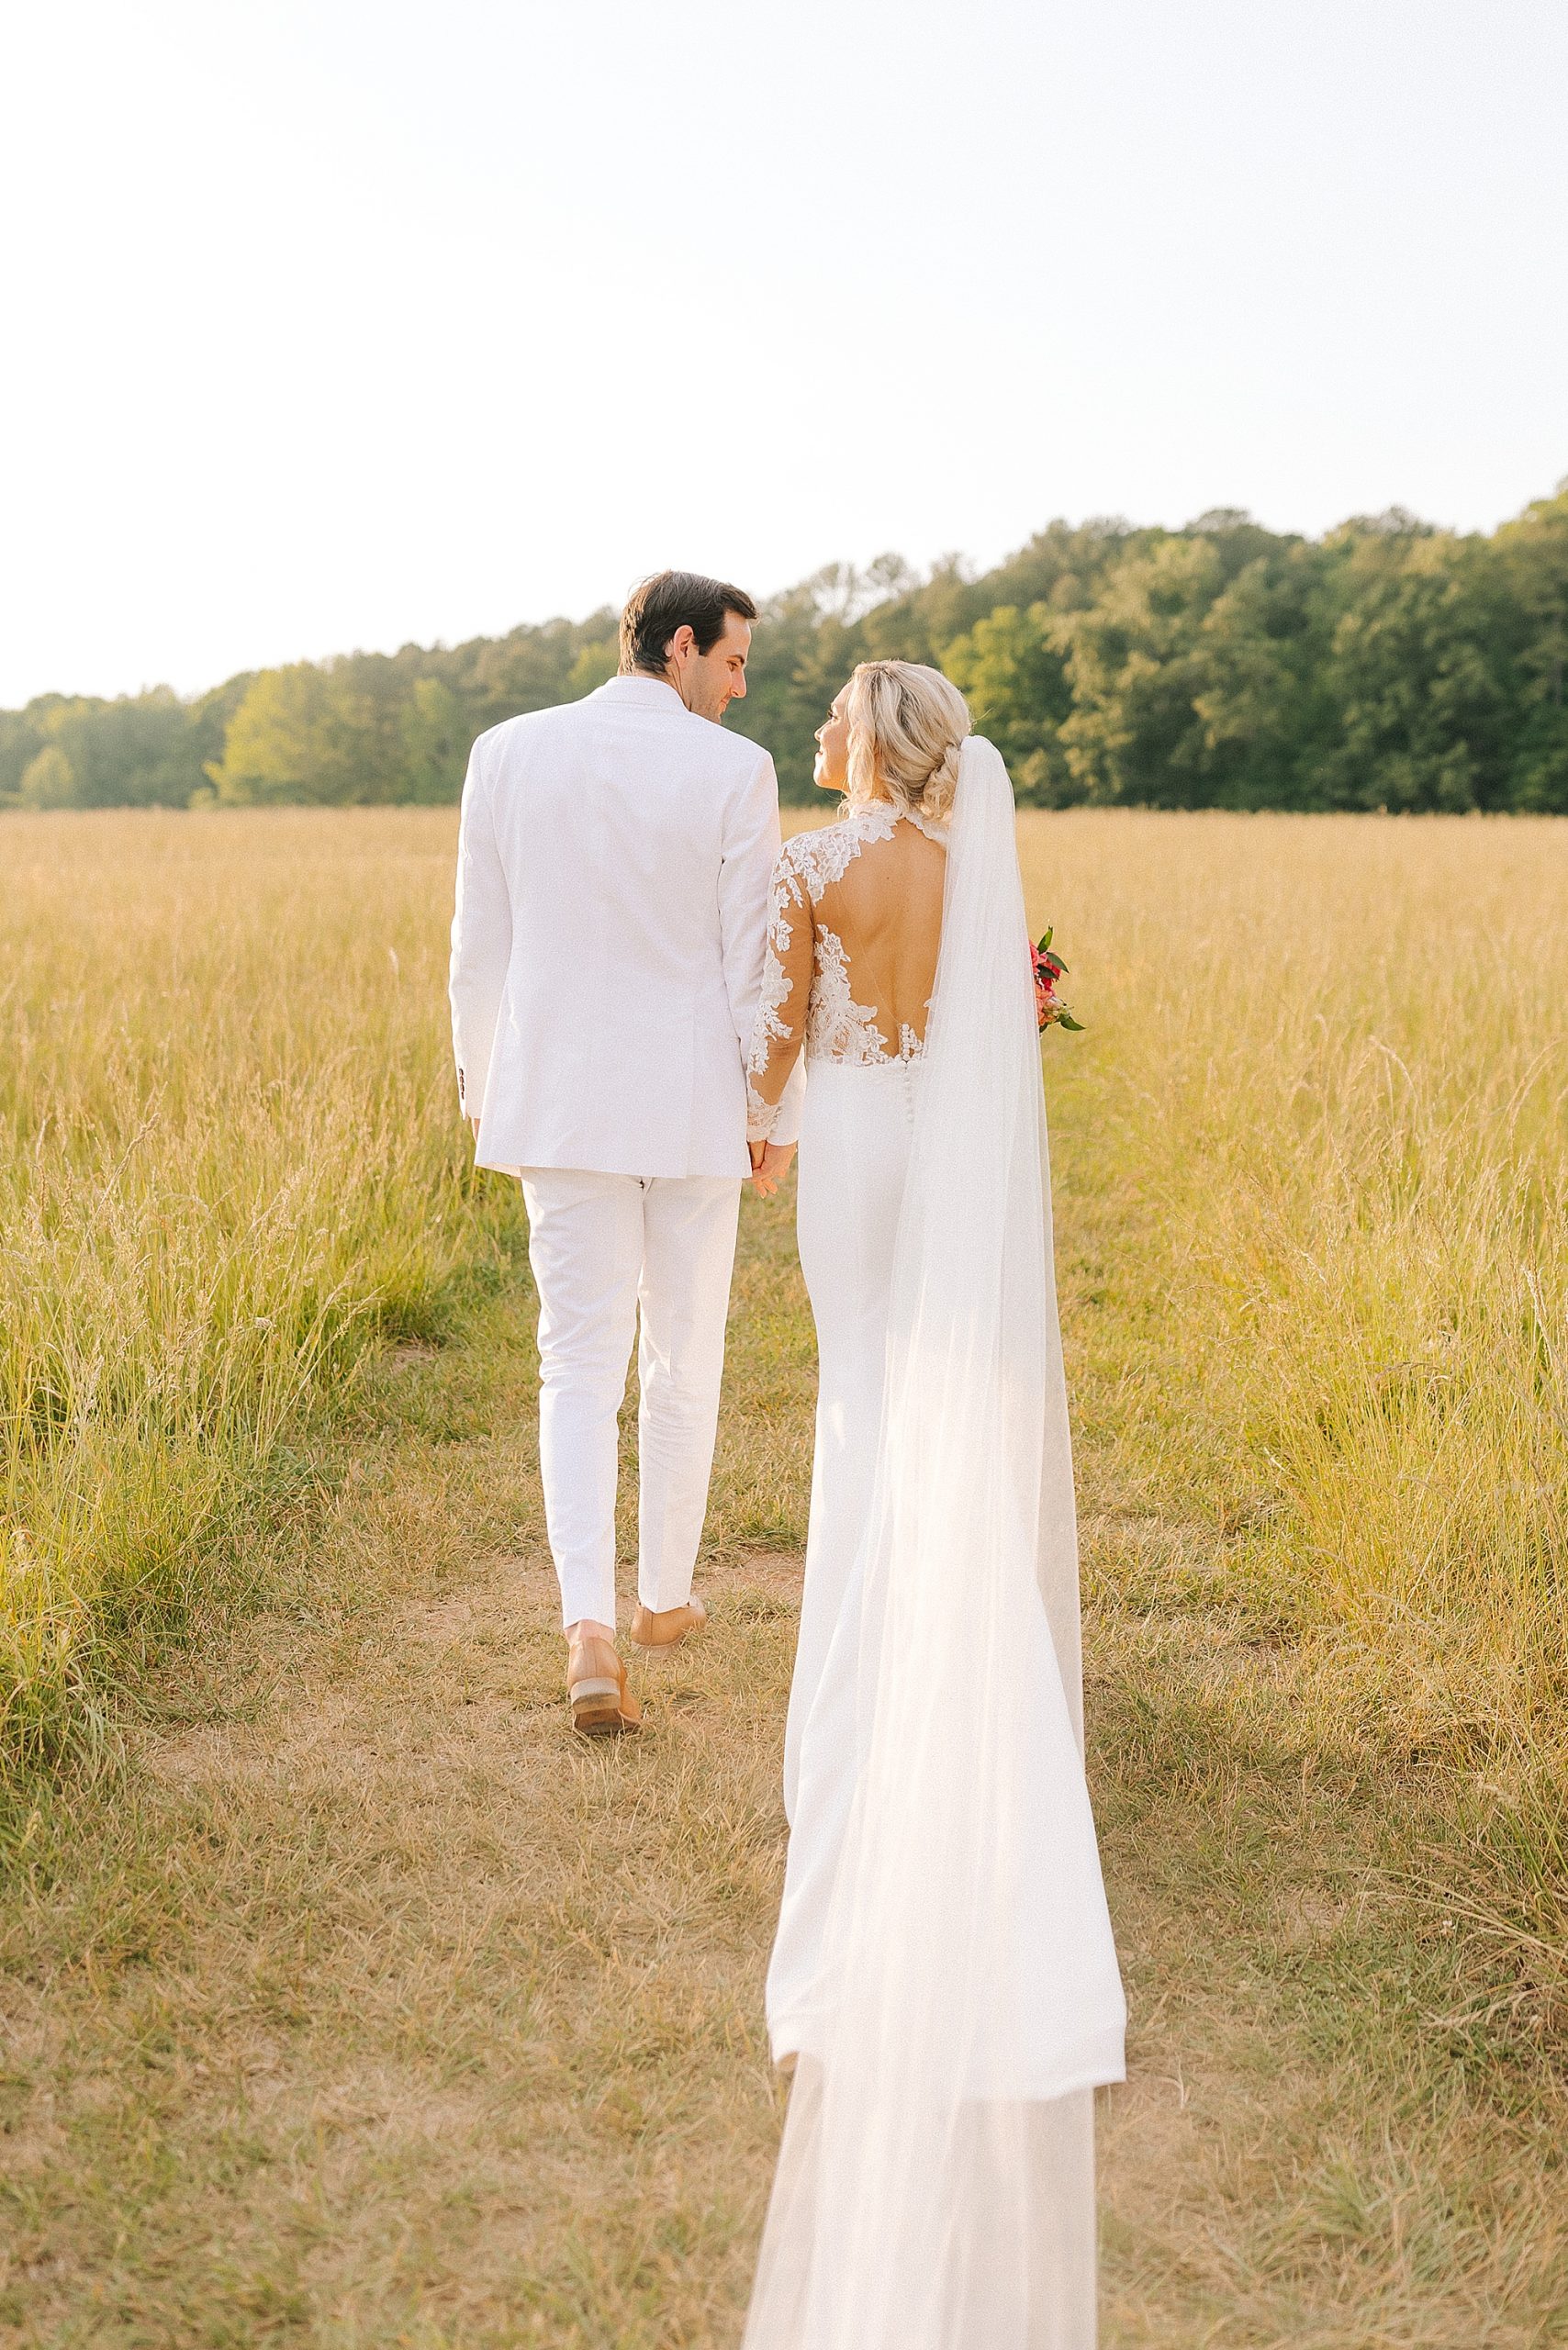 newlyweds walk through path in field at The Meadows Raleigh with bride's veil trailing behind her 